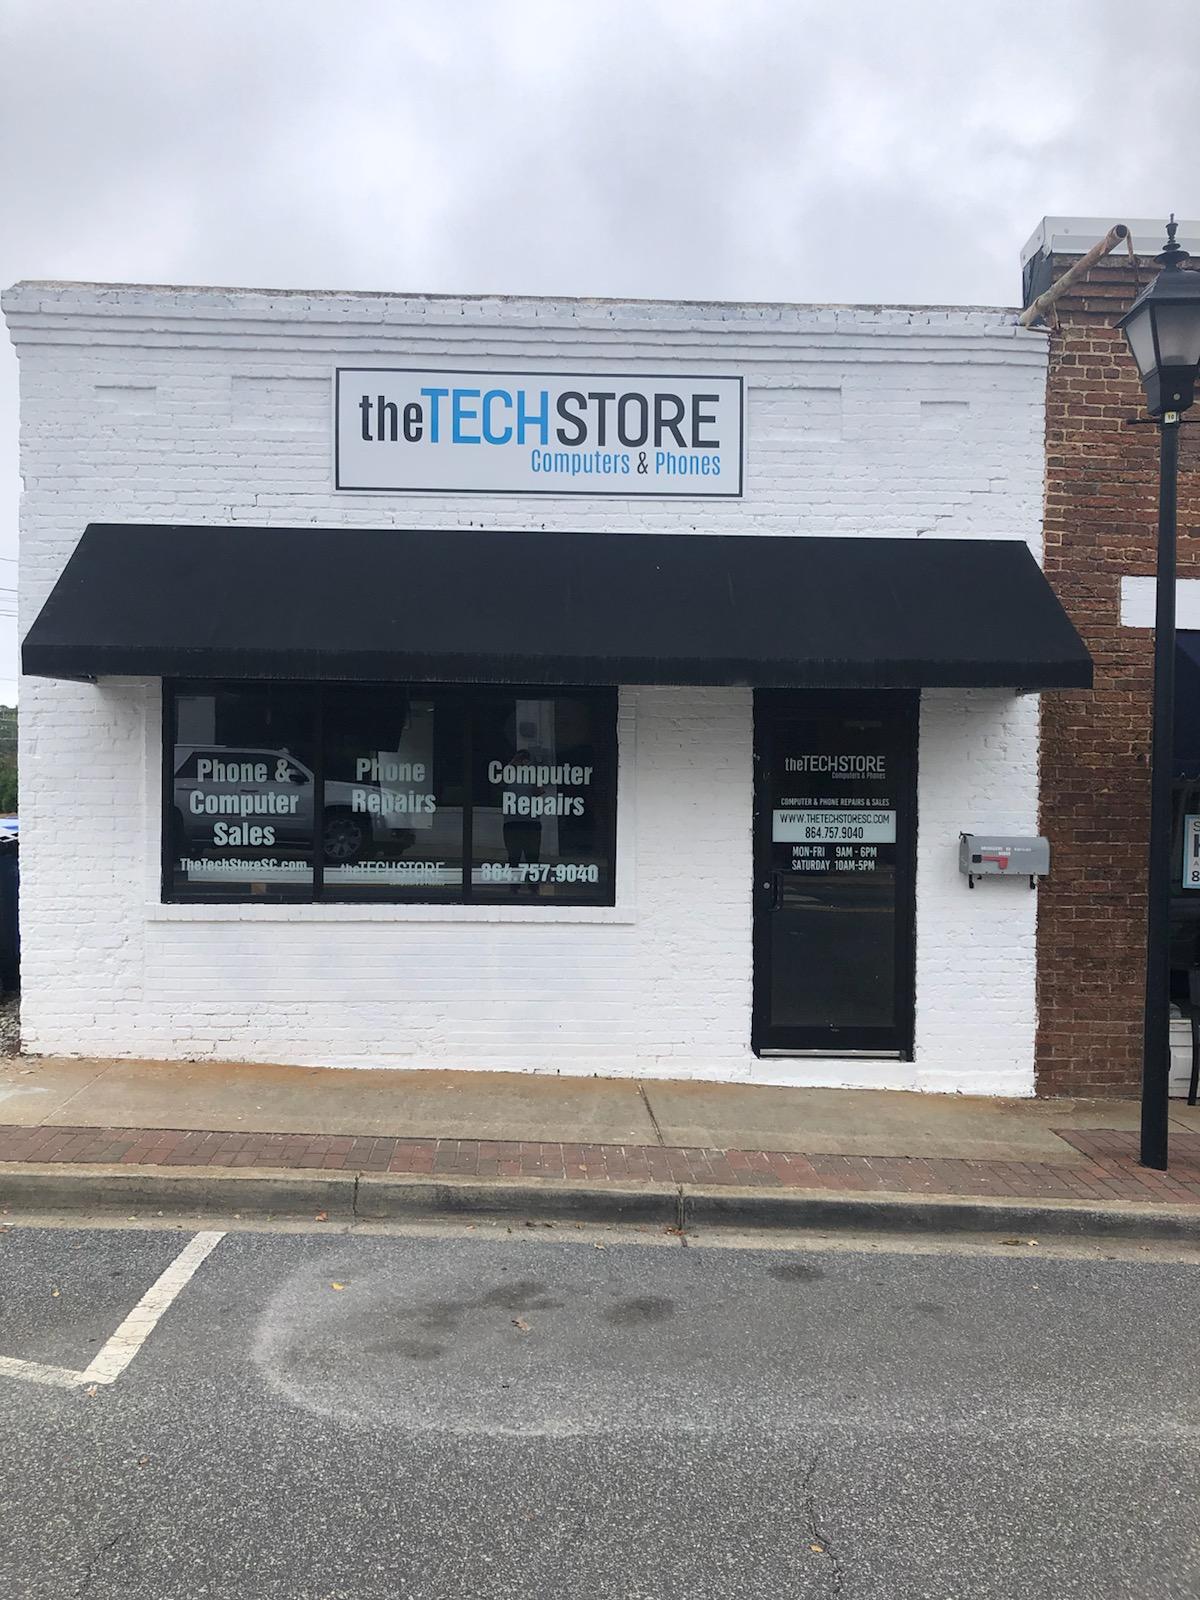 The Tech Store